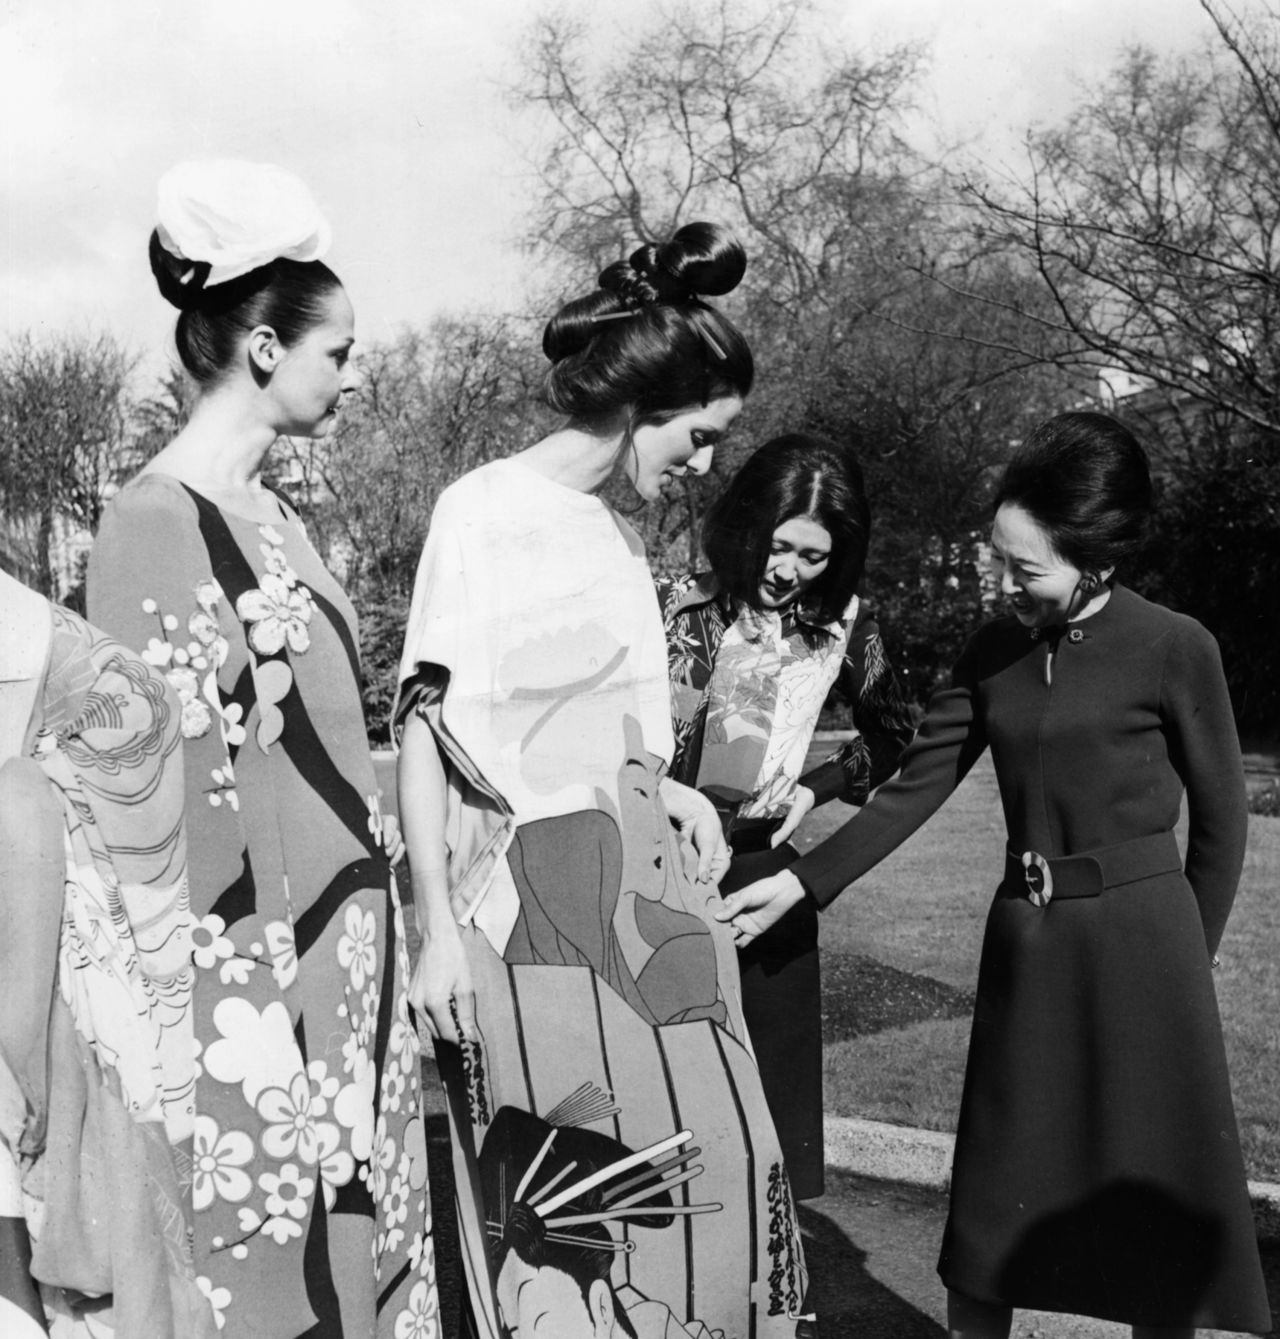 Hanae Mori (second from right) presents some of her creations during a private fashion show at the Japanese Embassy in London in 1972.